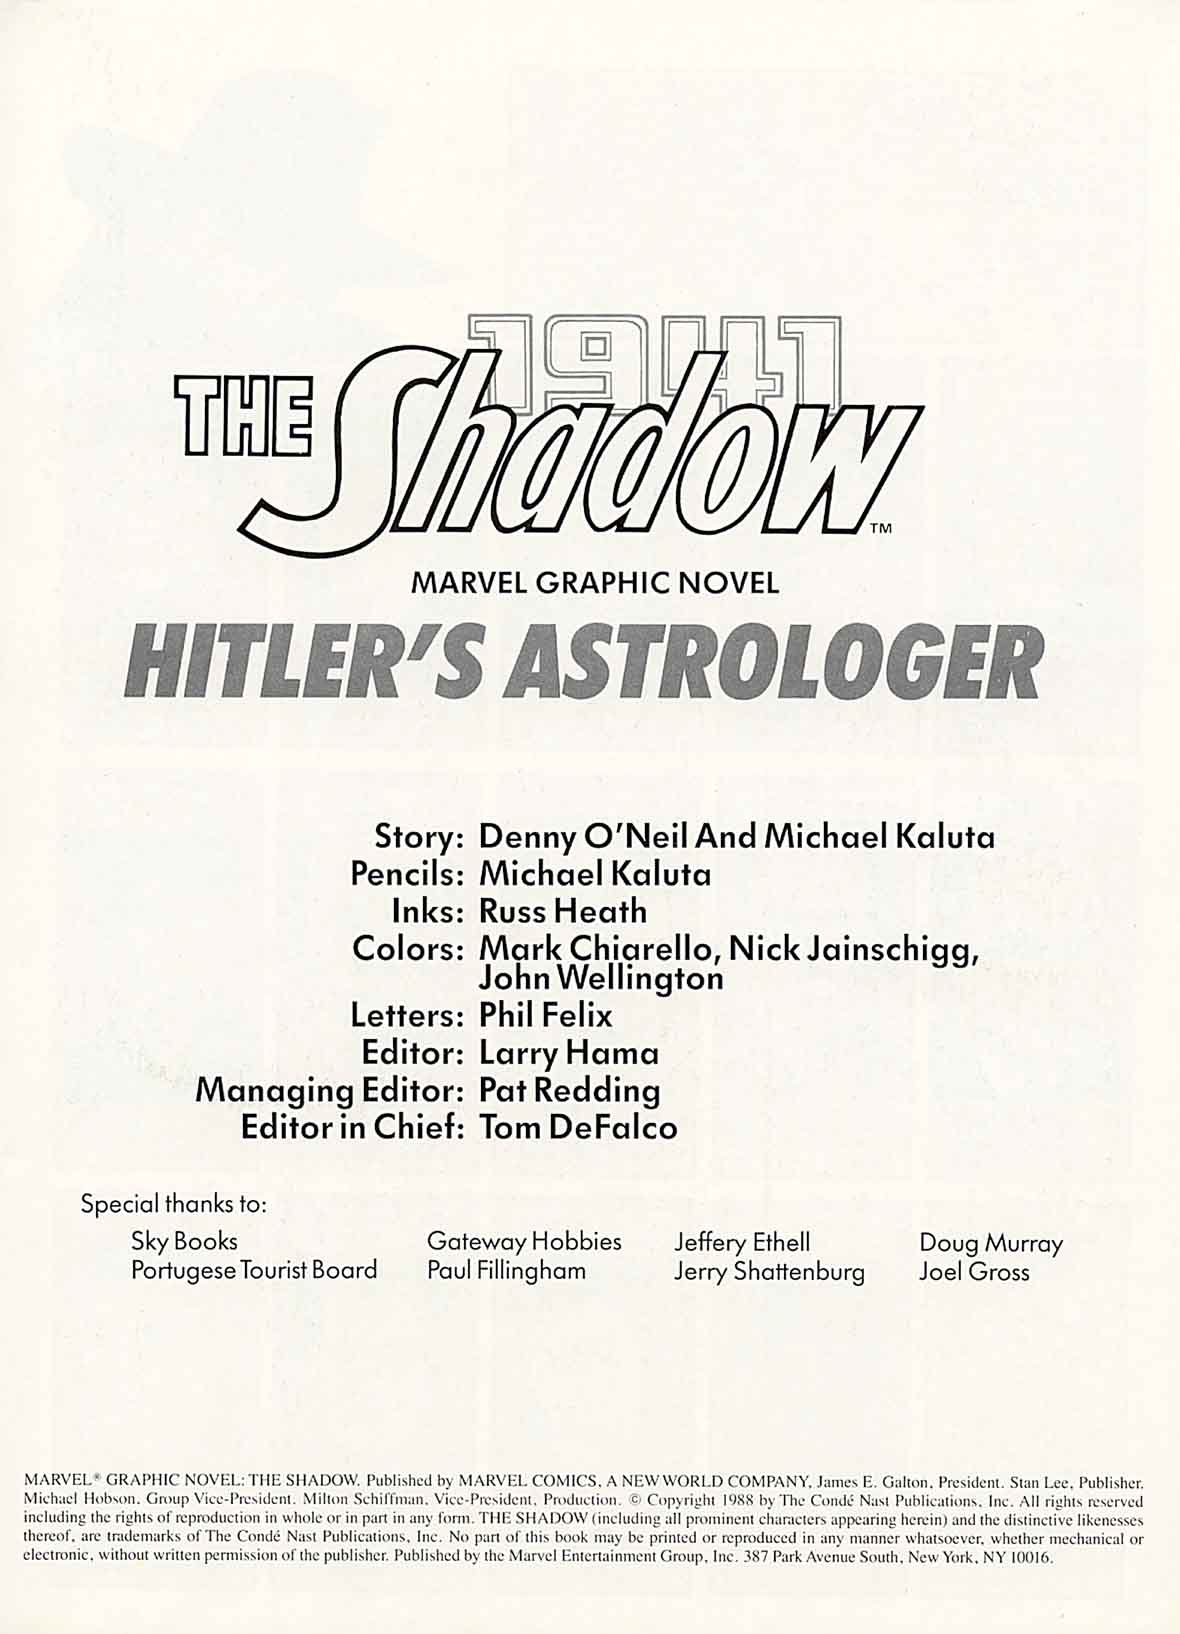 Read online Marvel Graphic Novel comic -  Issue #34 - The Shadow - Hitler's Astrologer - 4